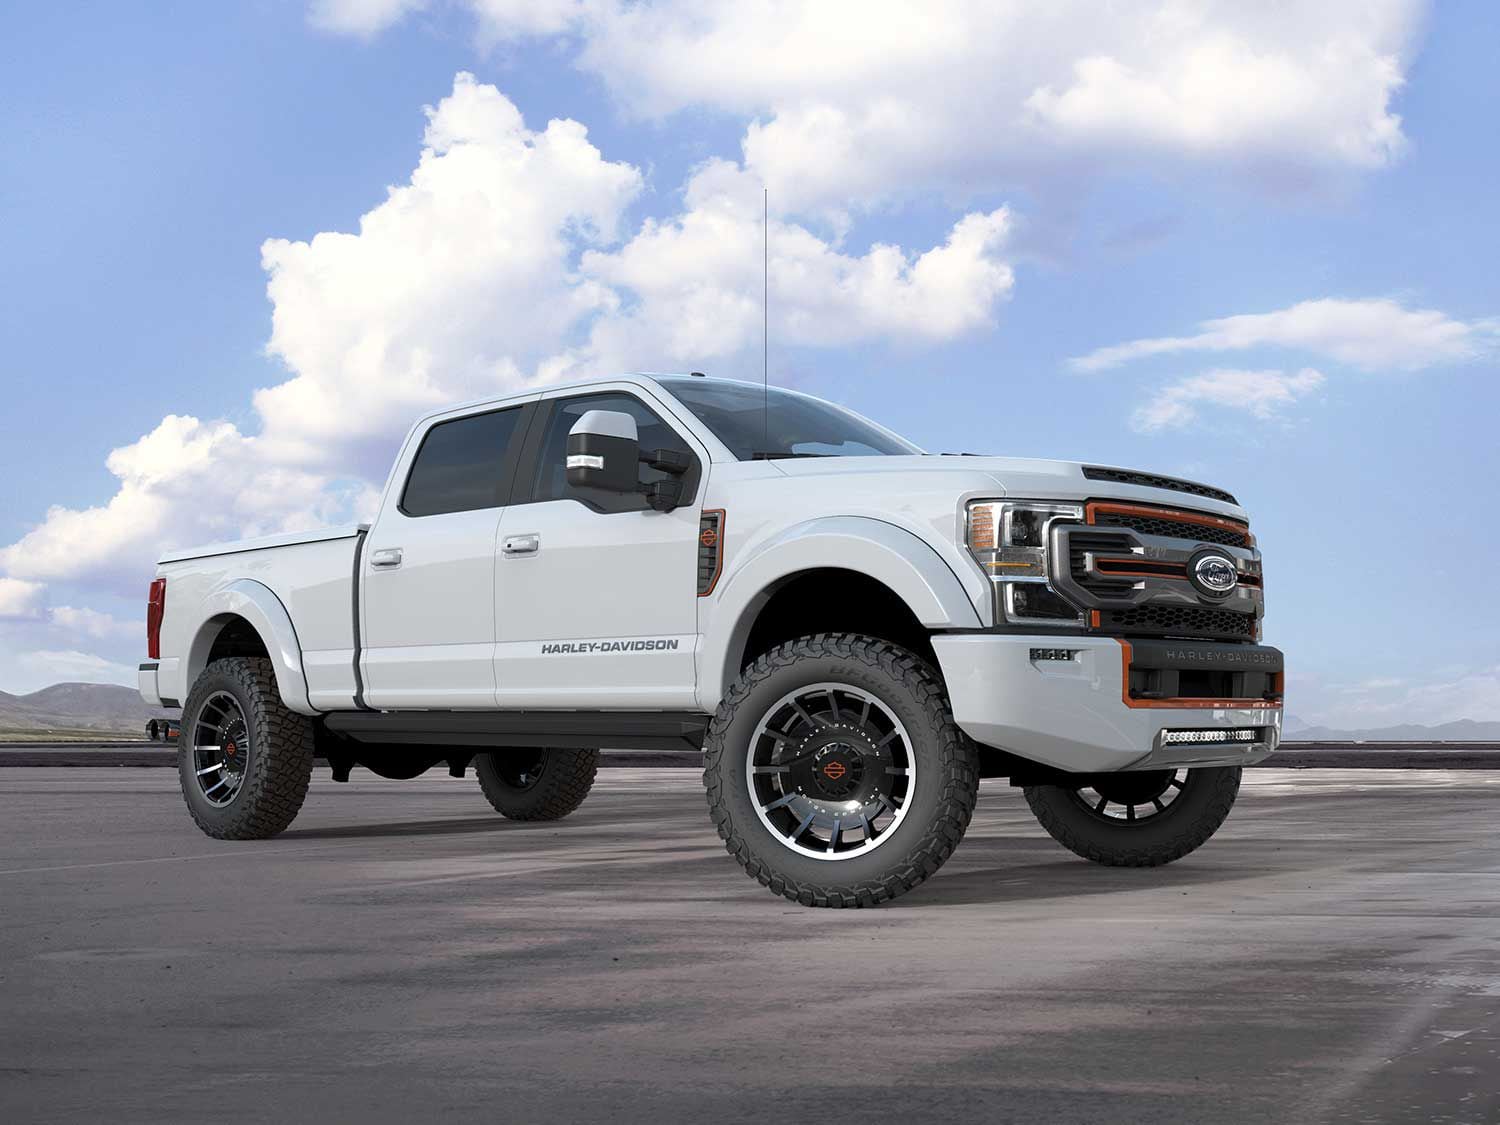 2020 Ford F250 HarleyDavidson Edition First Look Preview LaptrinhX